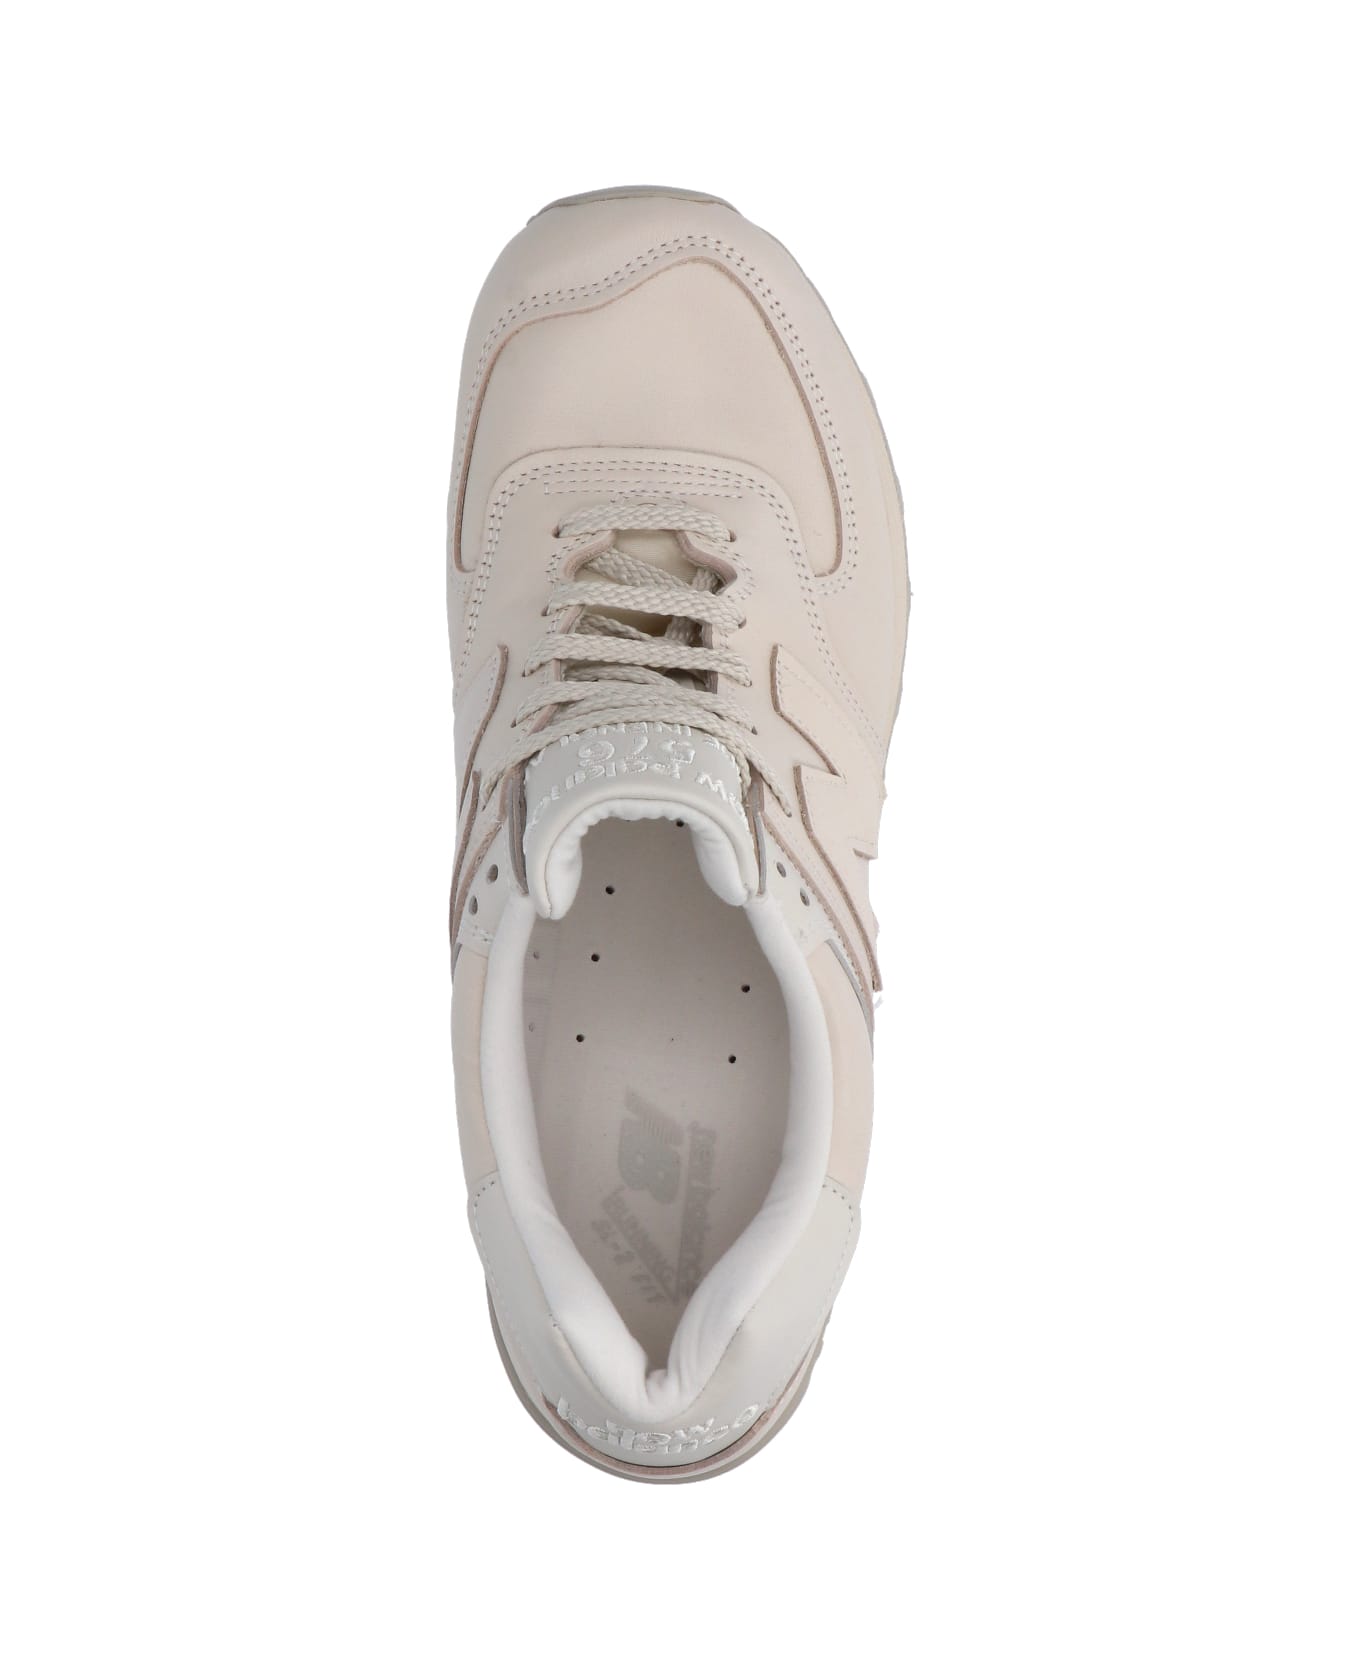 New Balance 'made In Uk 576' Sneakers - Crema スニーカー